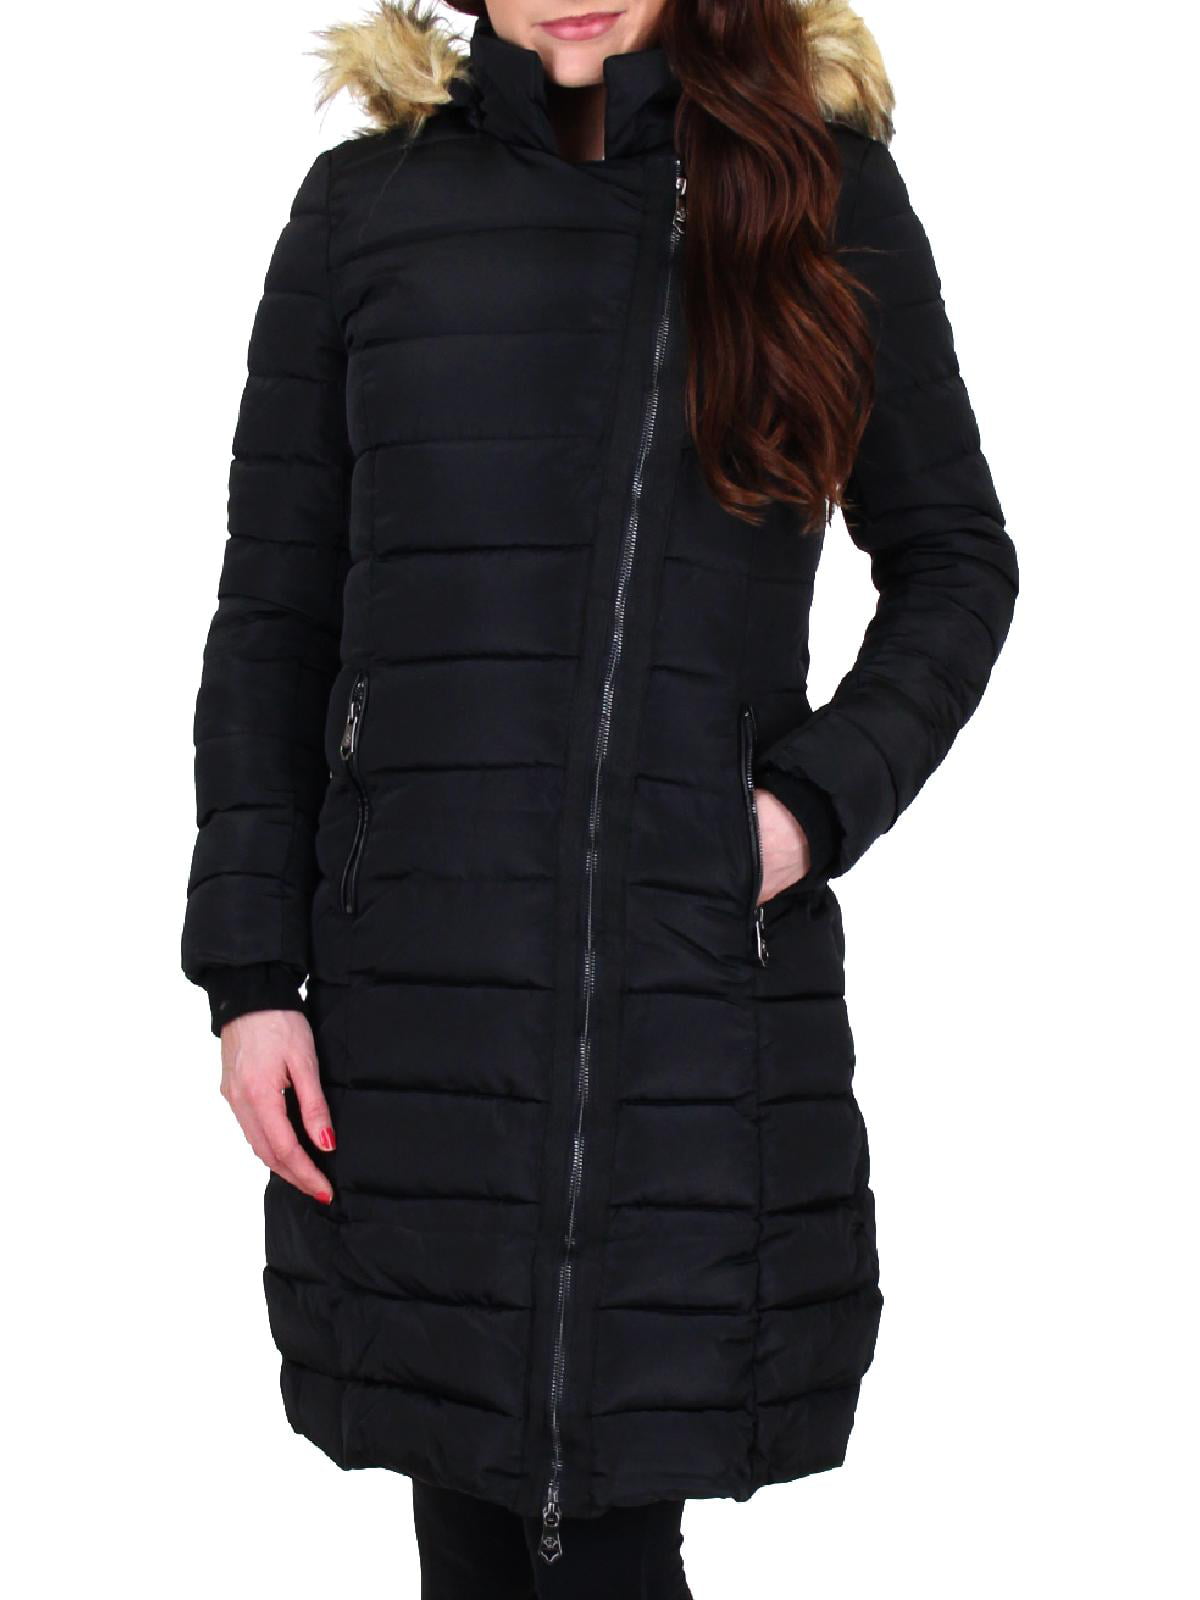 Nanette Lepore Womens Belted Puffer Coat with Faux Fur Collar 